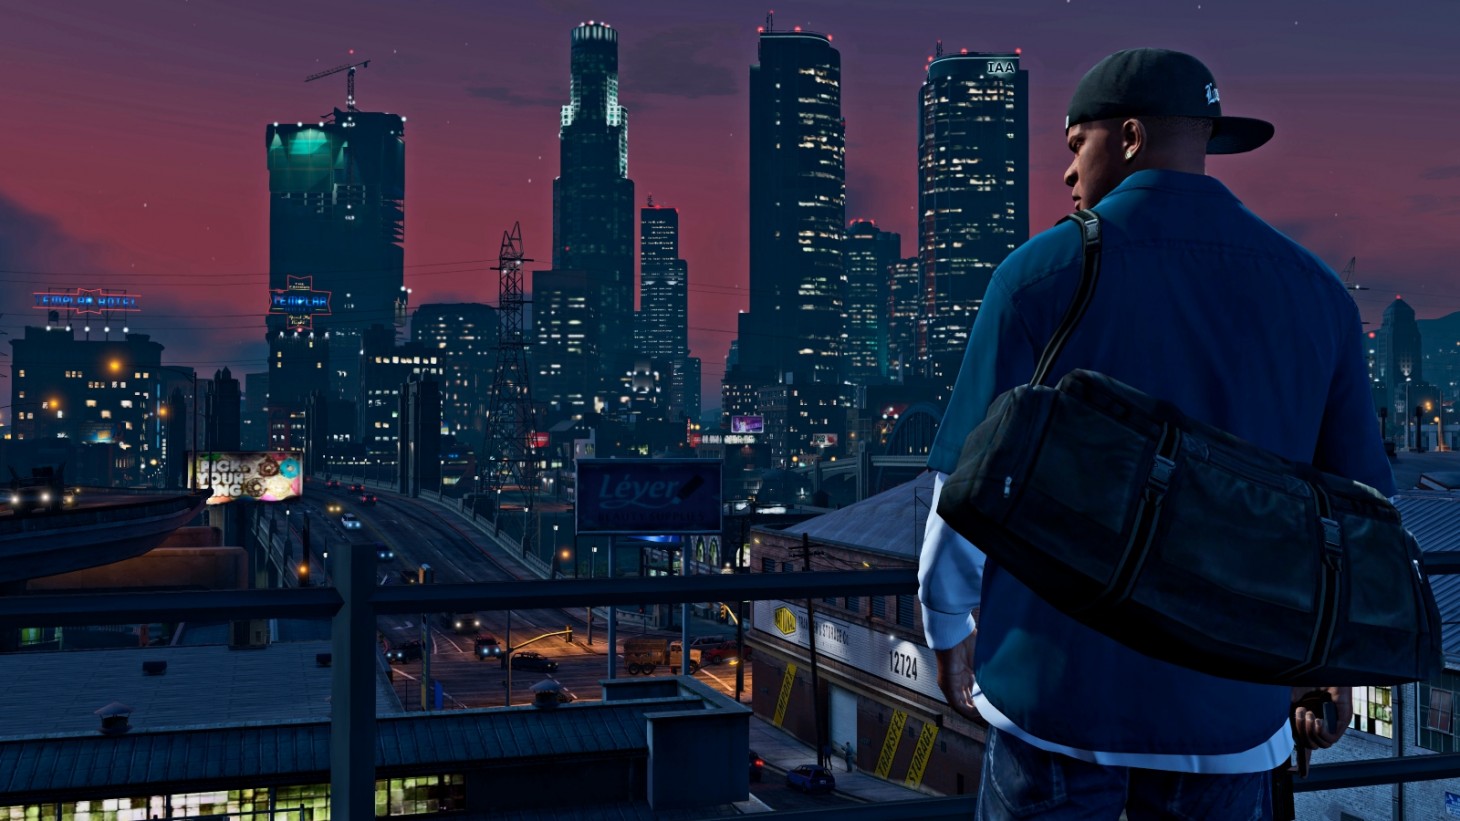 Grand Theft Auto 5 PS5 and Xbox Series X to launch November